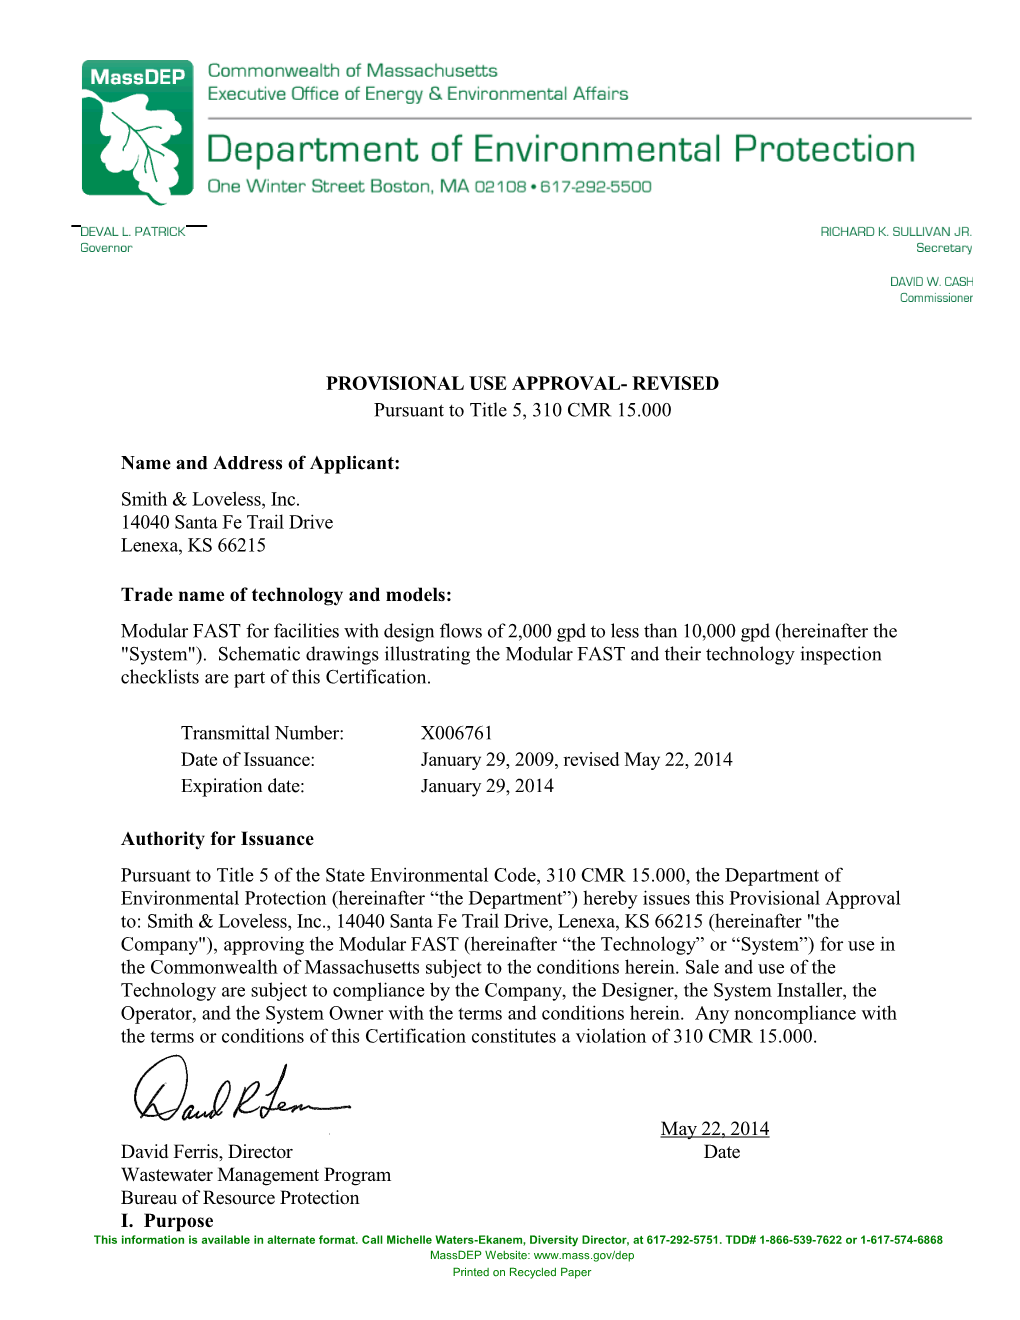 Provisional Approval - Revised 5/22/2014Page 1 of 15